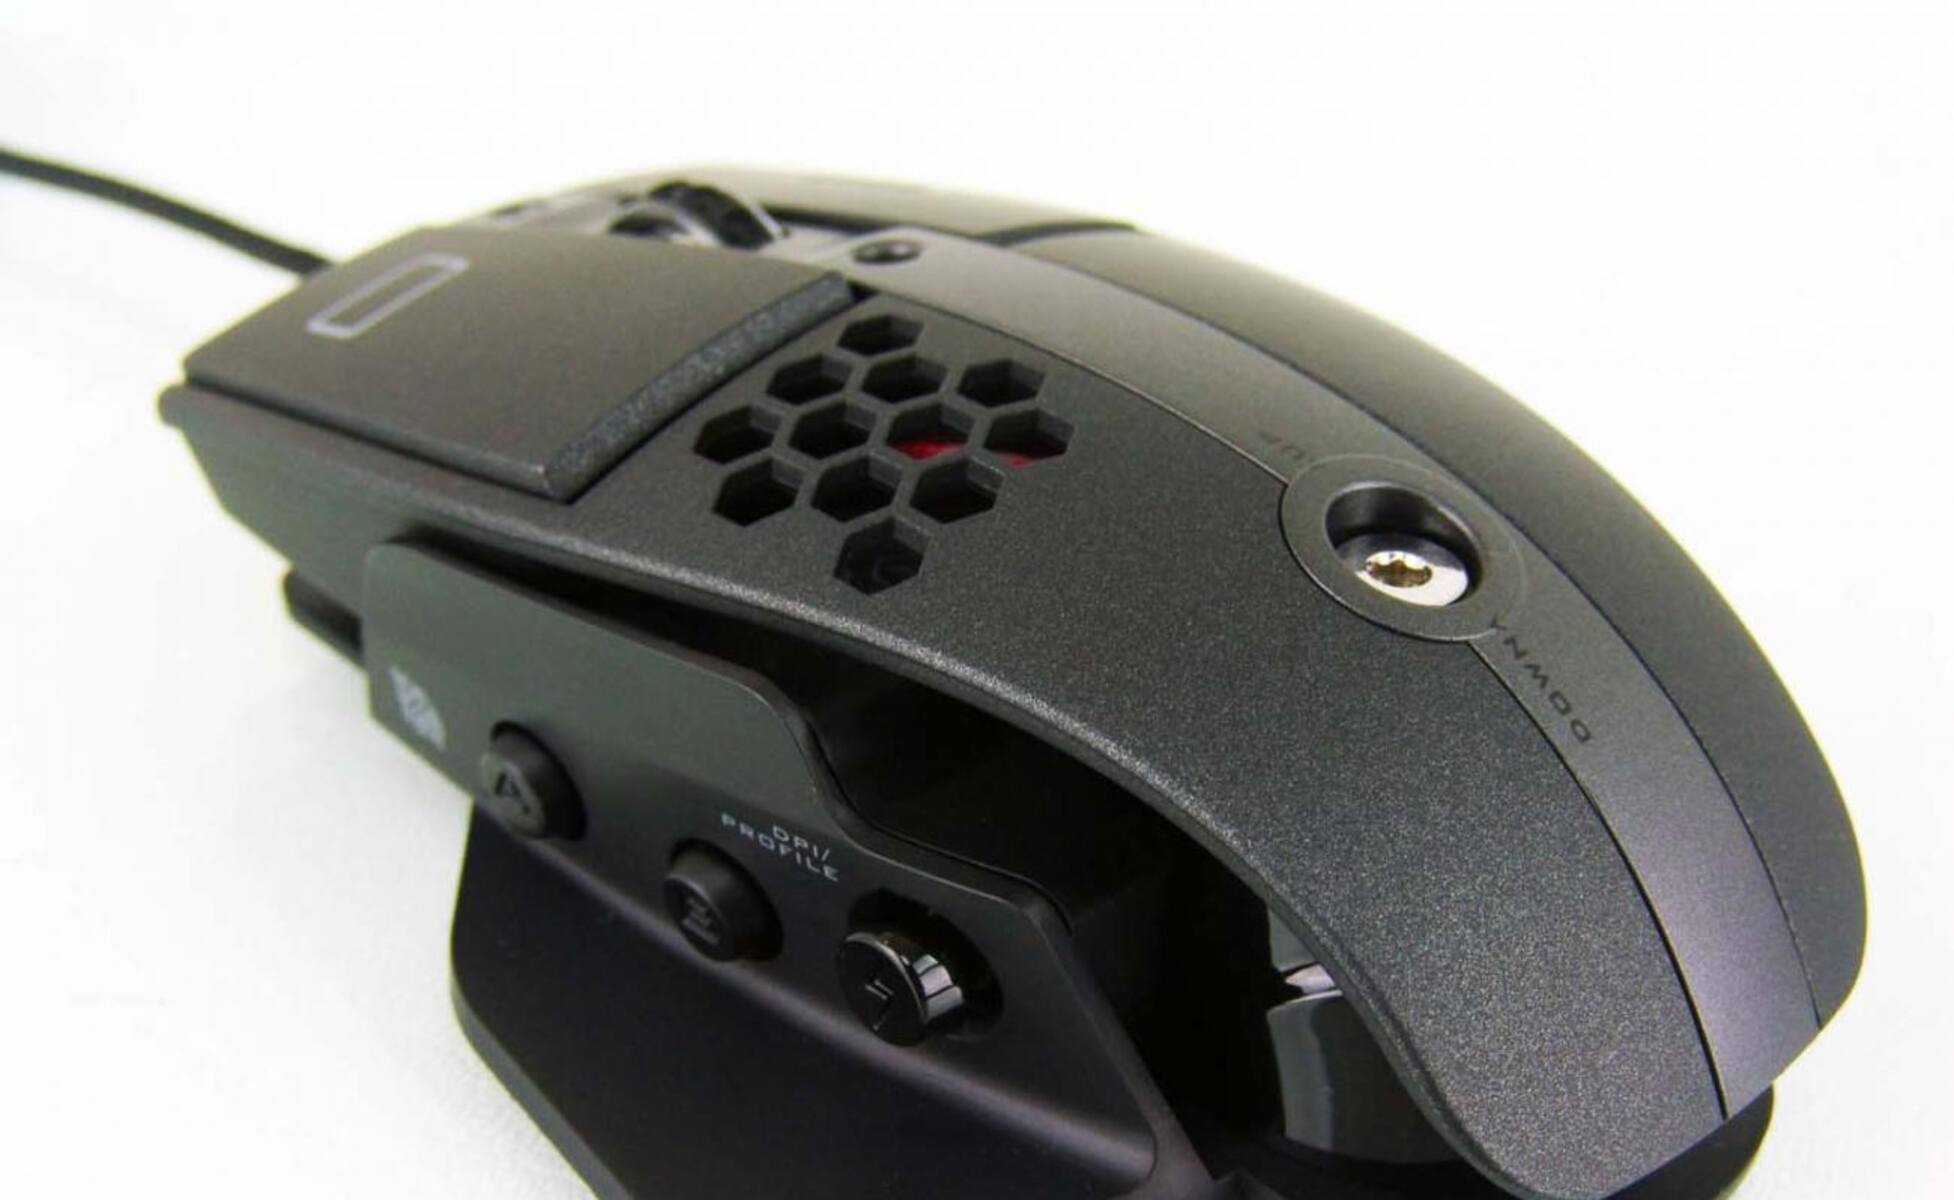 How To Adjust L10 Gaming Mouse